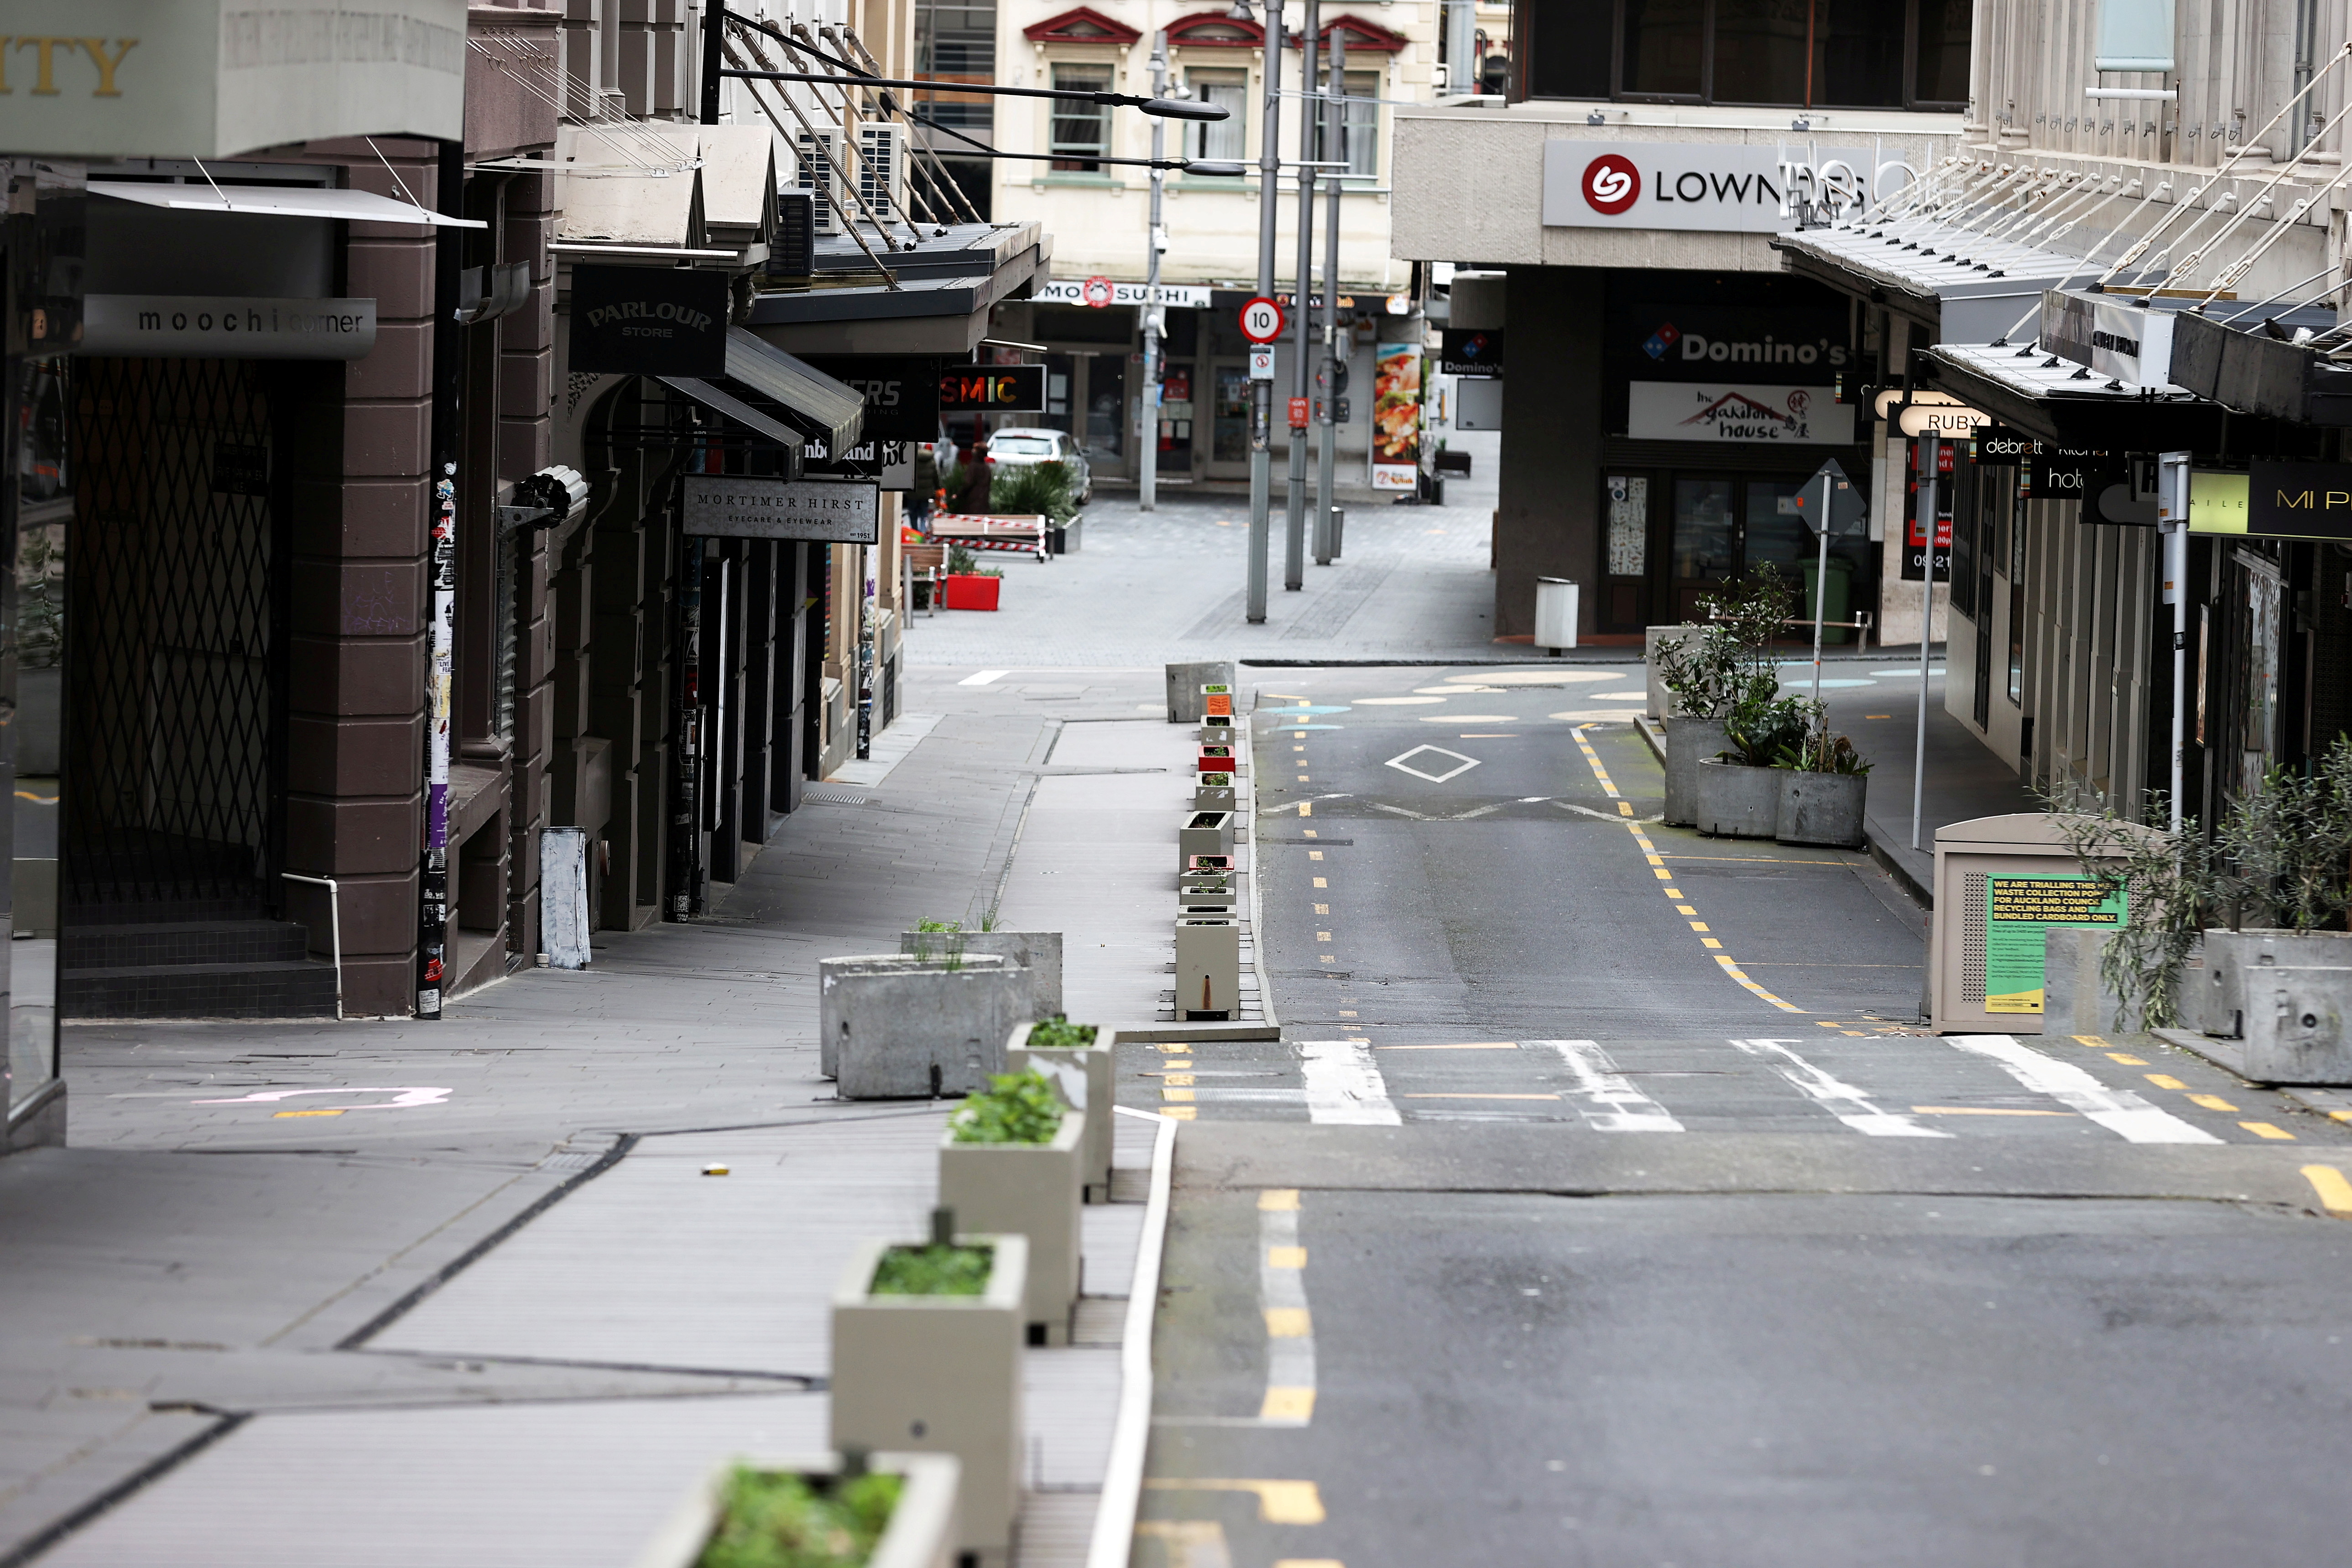 The normally bustling High Street in Auckland’s CBD is largely deserted during a lockdown to curb the spread of a coronavirus disease (COVID-19) outbreak, in Auckland, New Zealand, August 26, 2021. REUTERS/Fiona Goodall